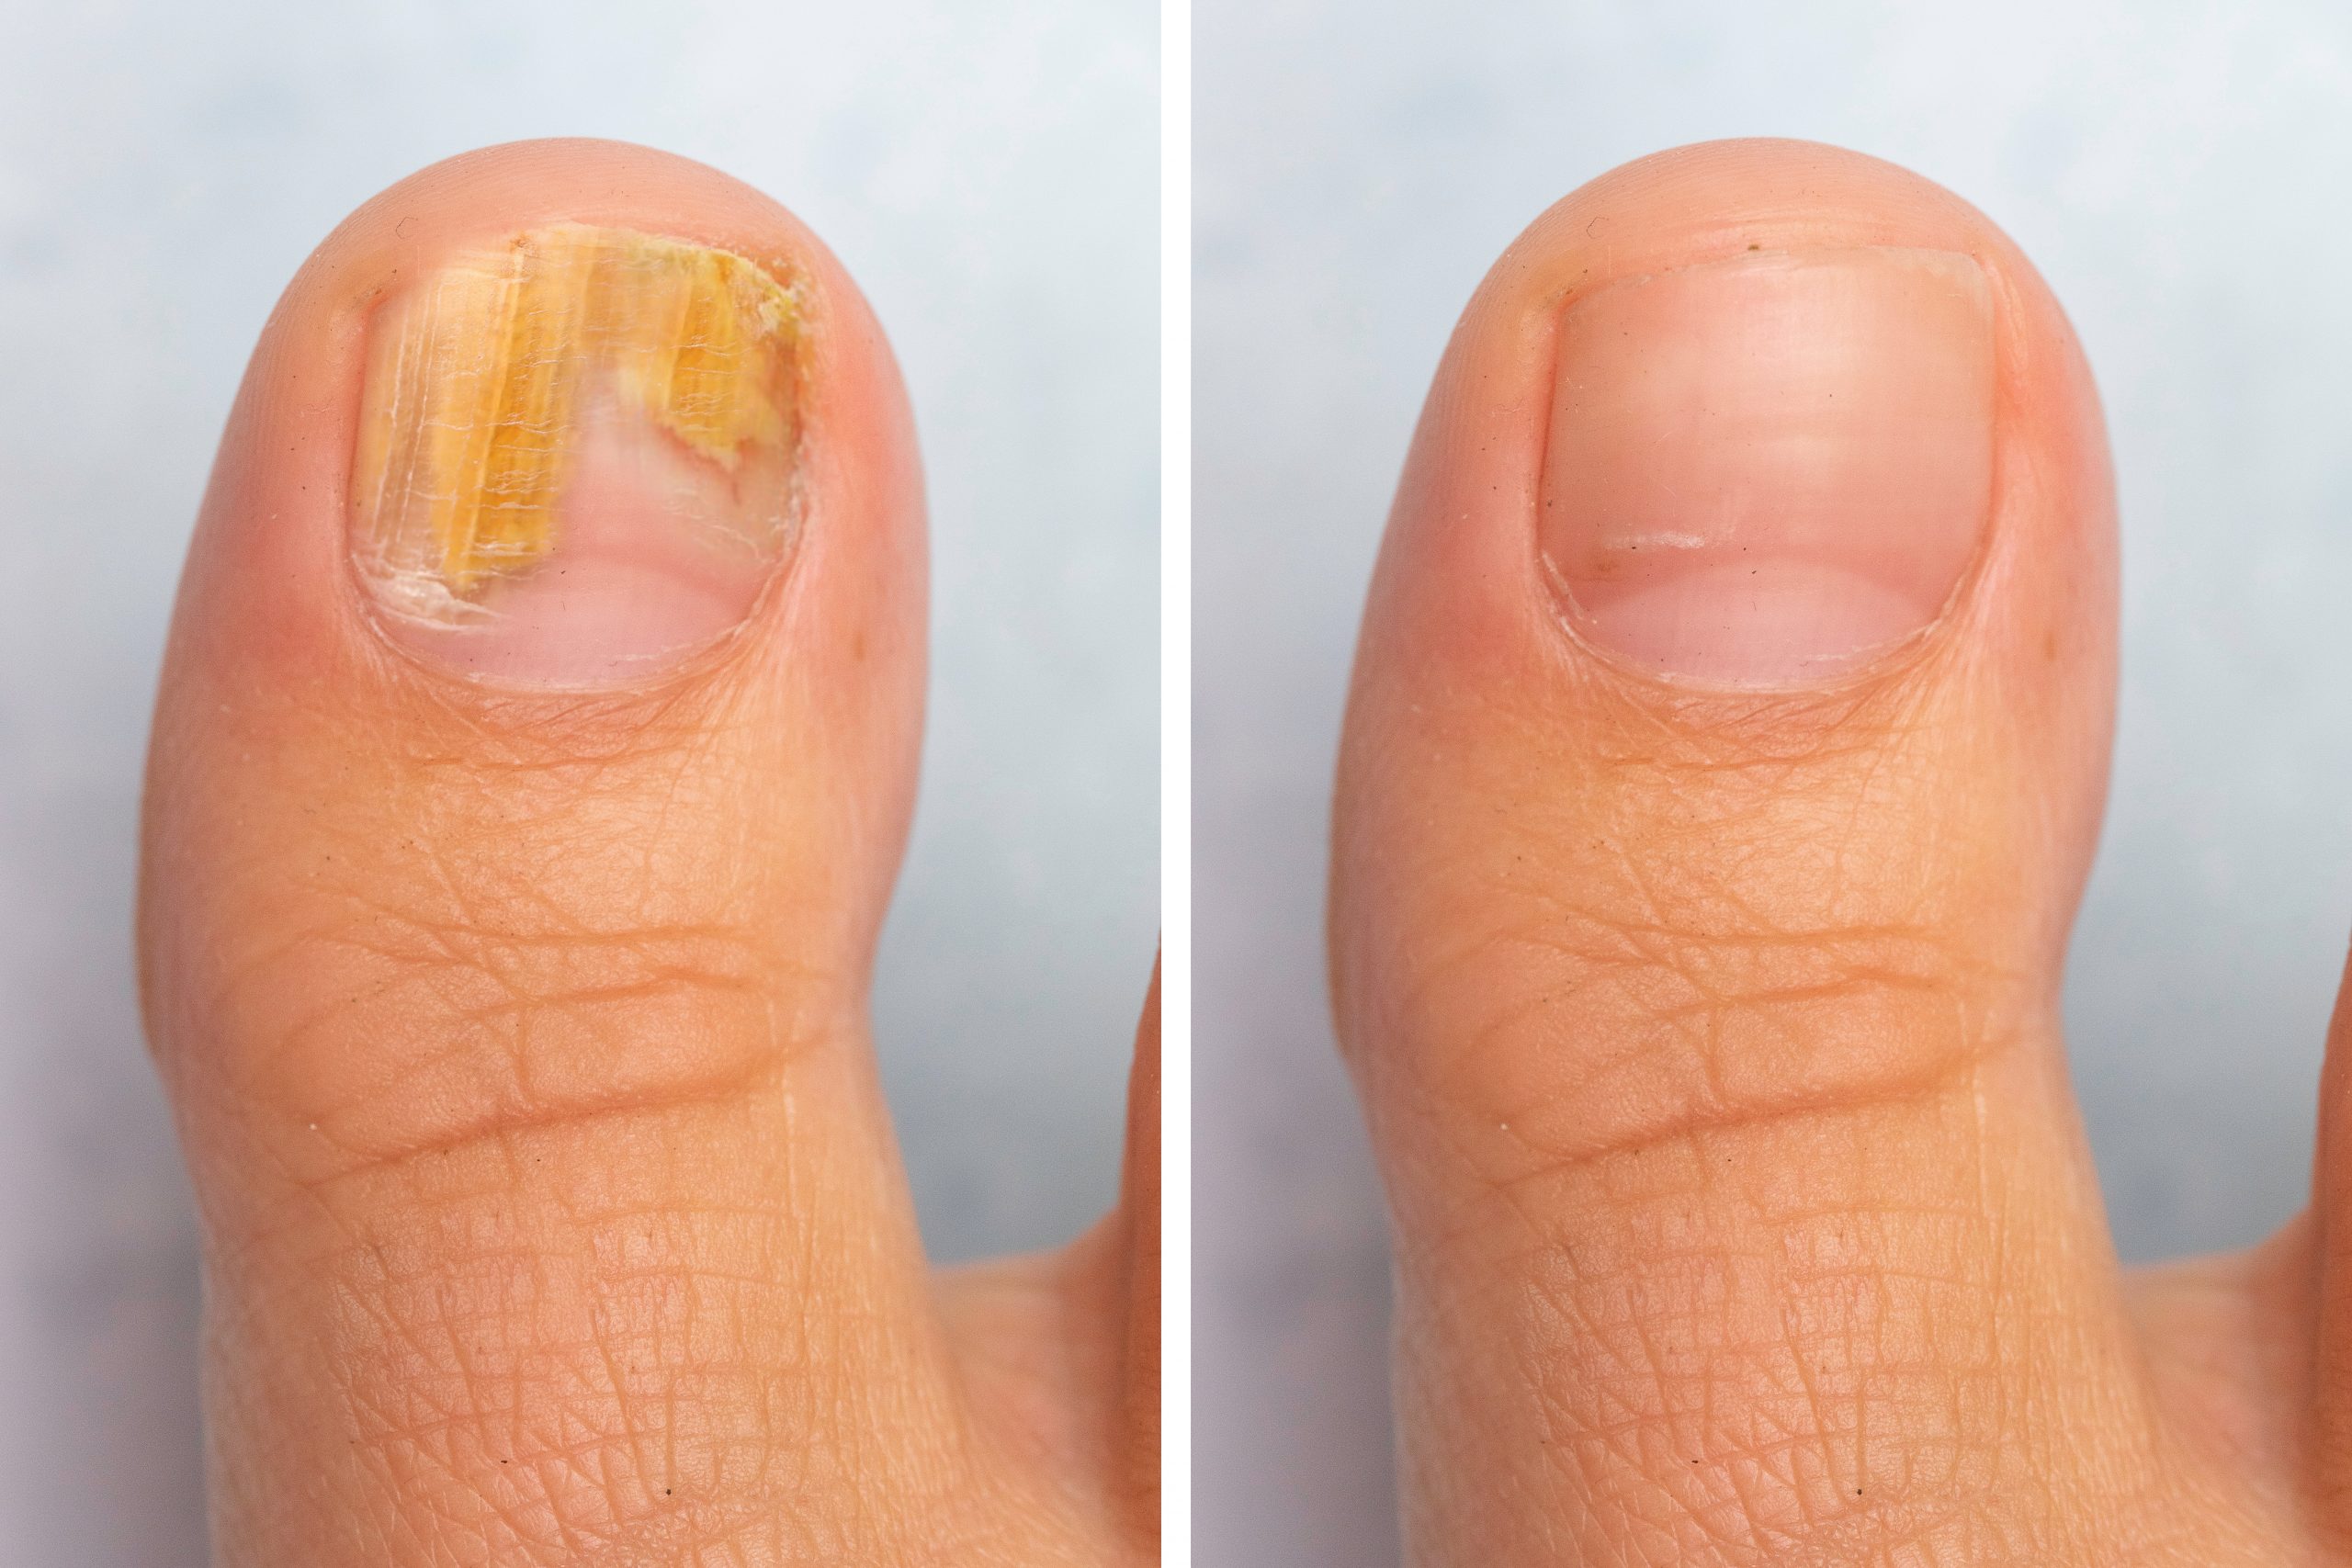 The connection between toenail fungus and diabetes